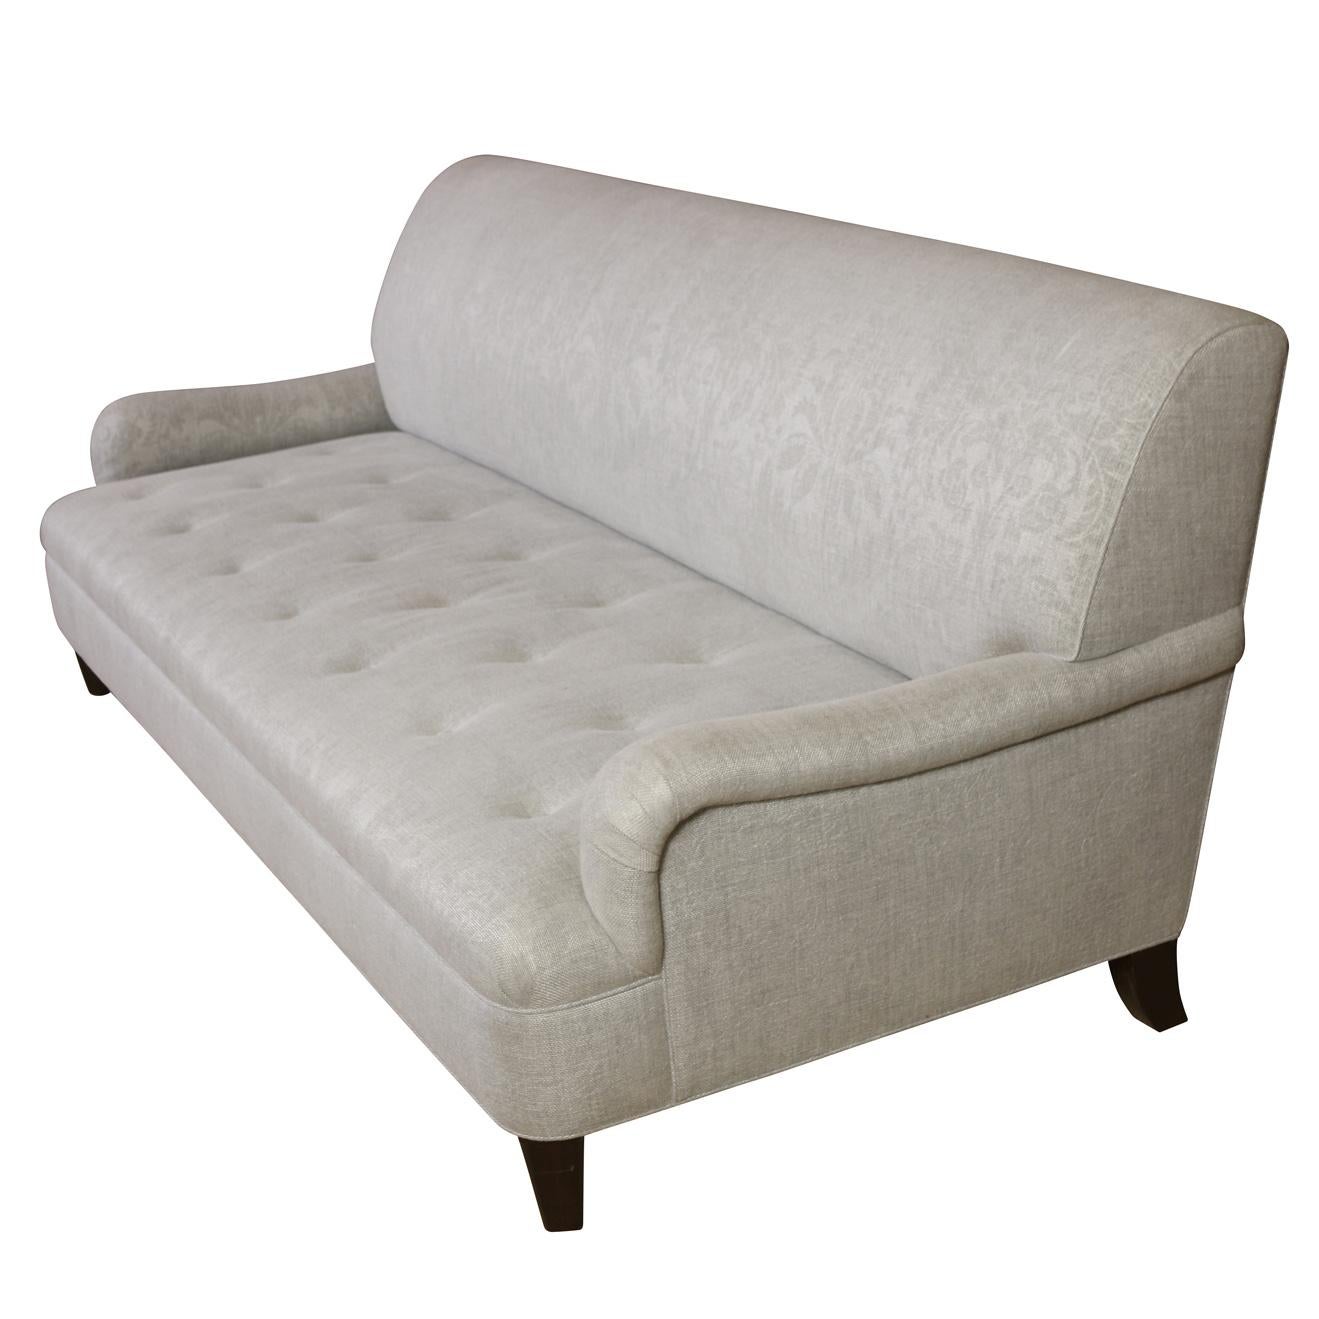 A contemporary style long sofa in silver jacquard upholstery with a tight back, tufted seat, low curved arms and wooden legs.